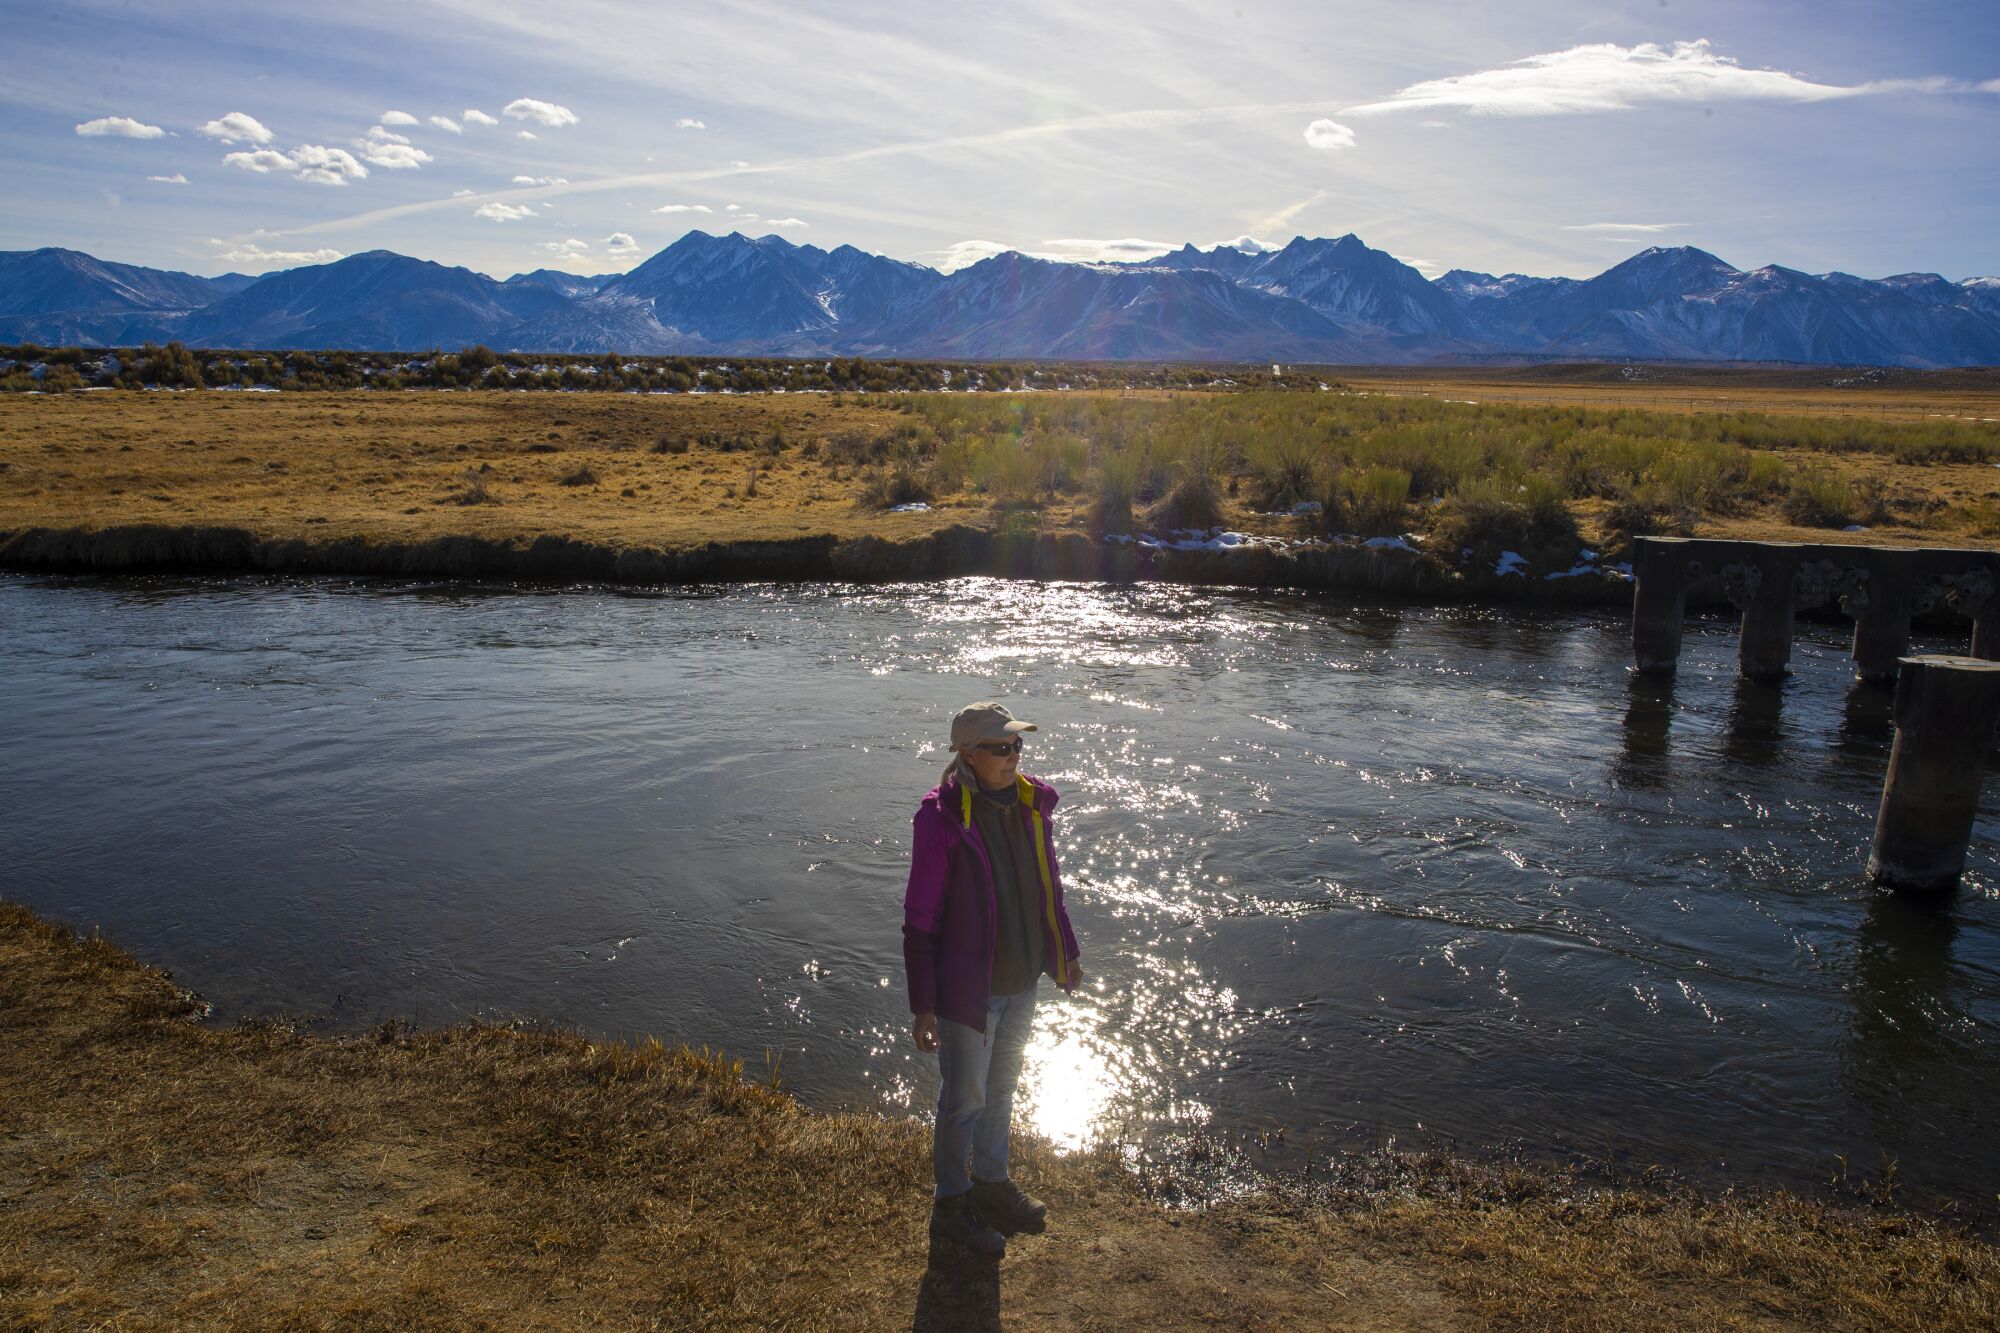 Laura Cunningham, California director of the nonprofit Western Watersheds Project, at the Owens River near Mammoth Lakes.